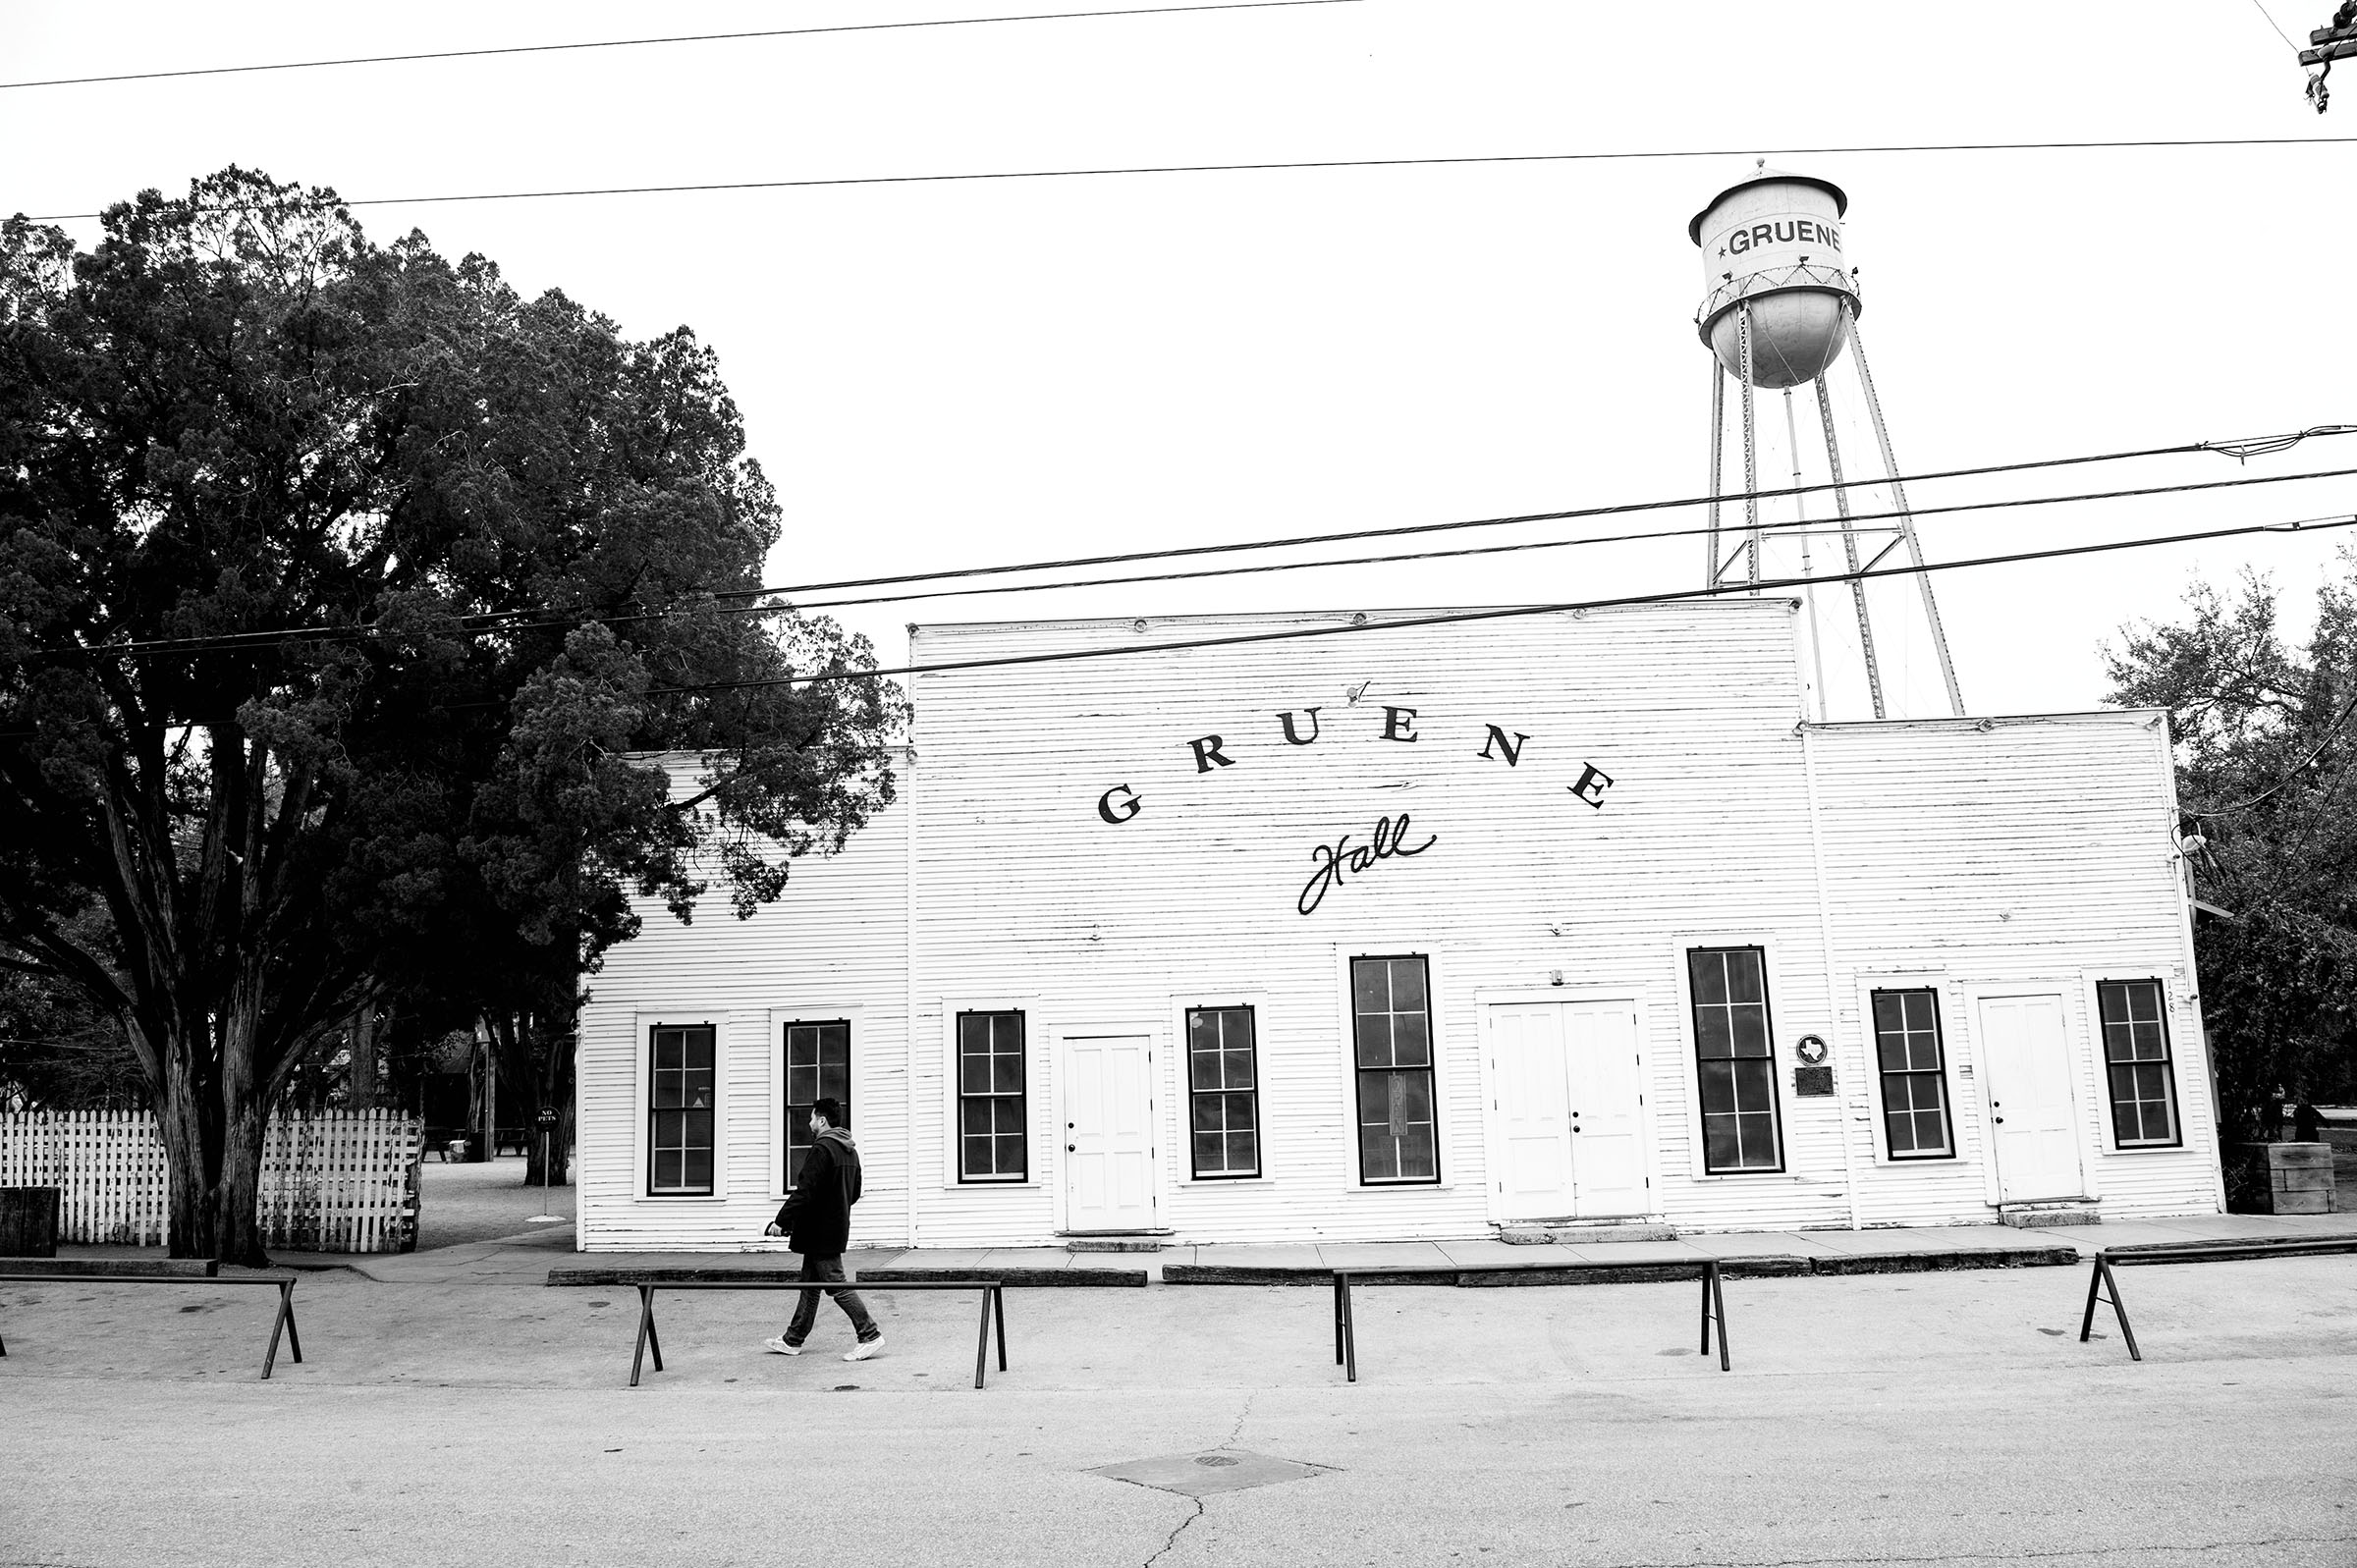 A black and white photo of the outside of a building reading "Gruene Hall" under a water tower